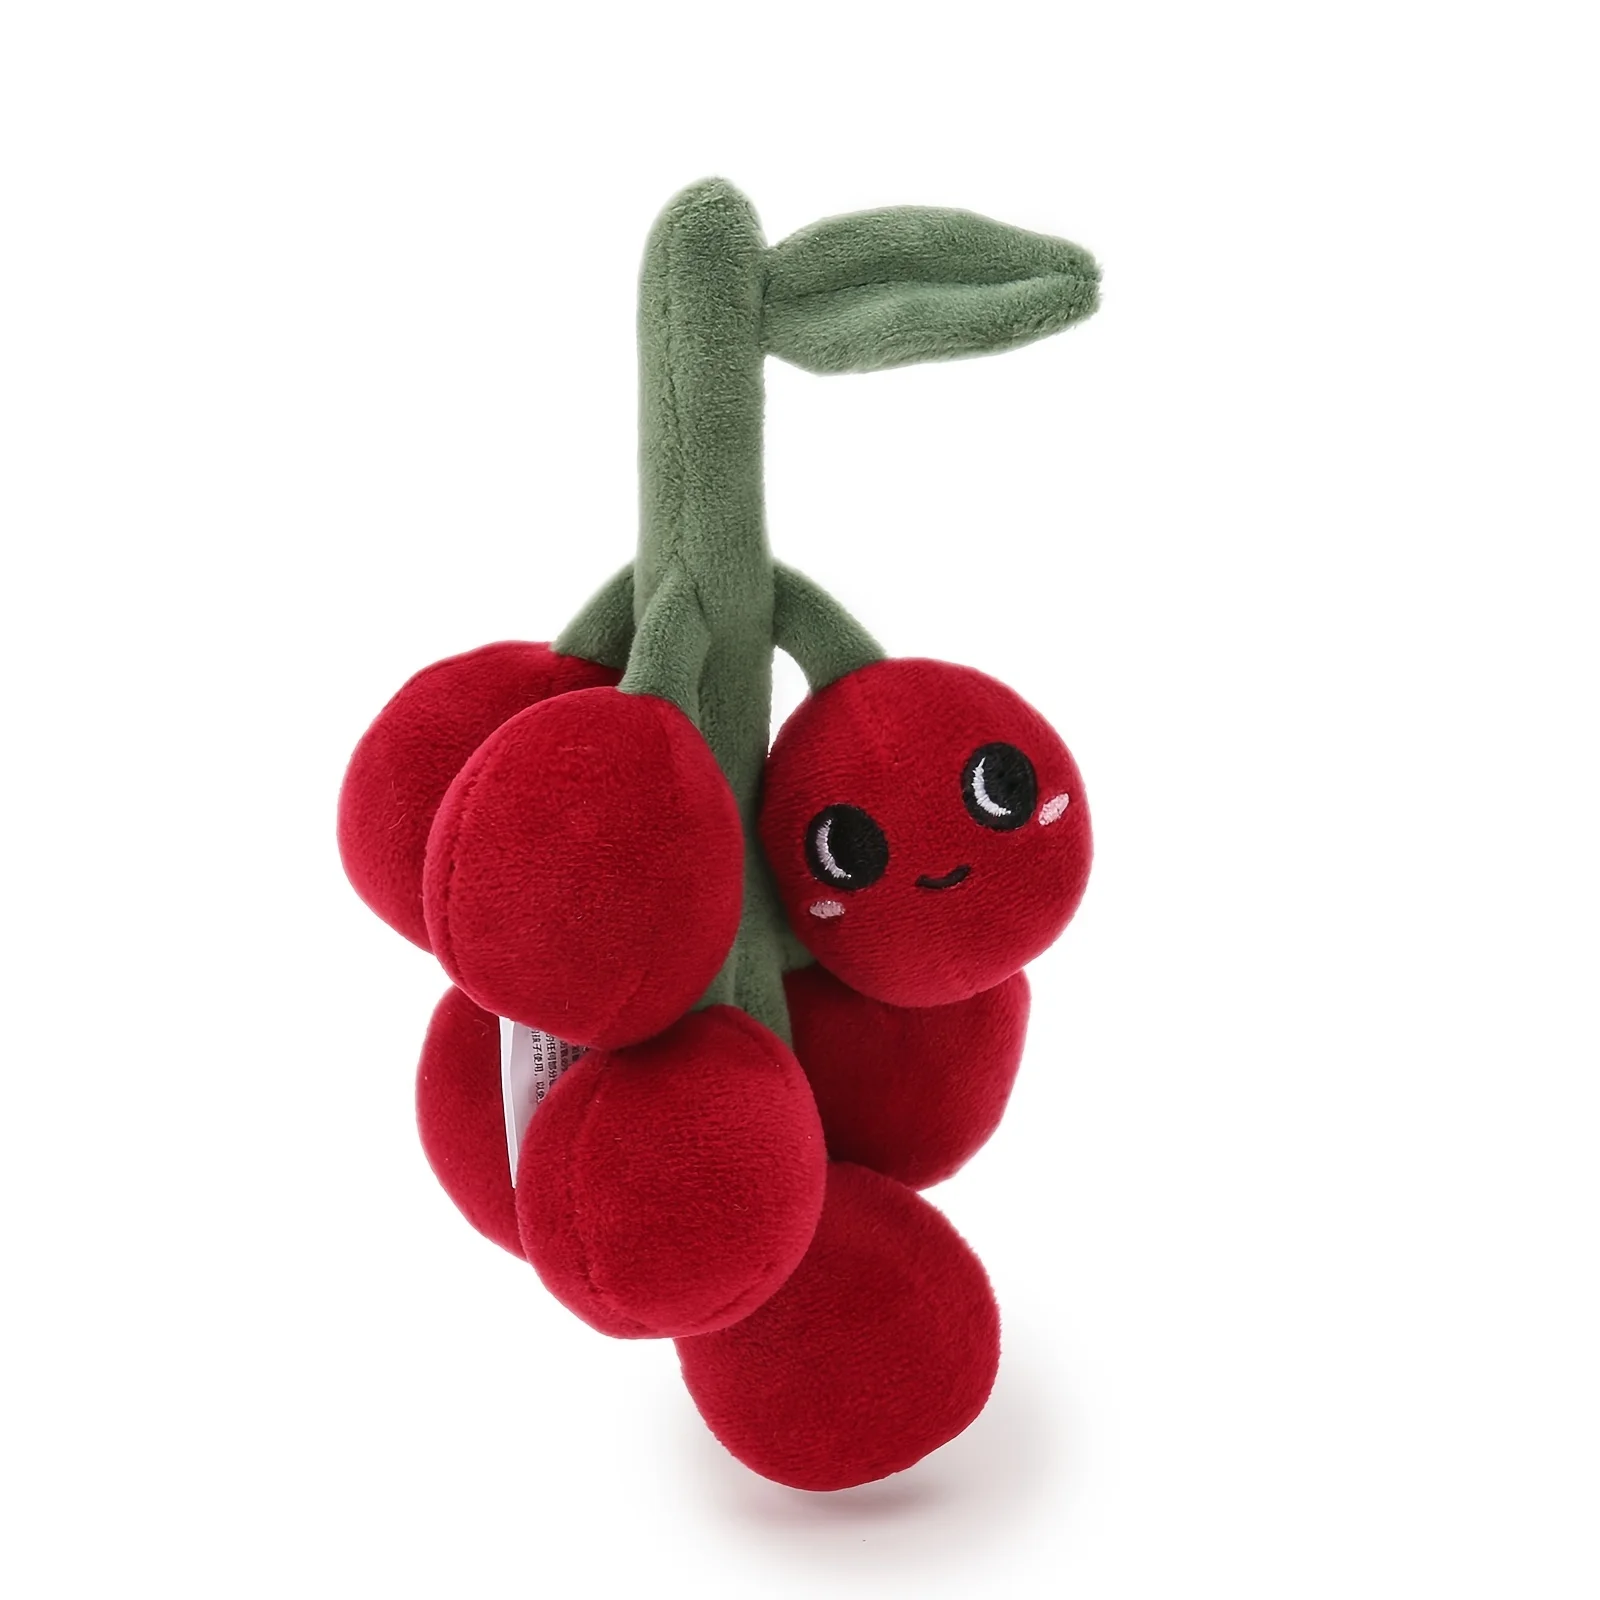 Red Grapes Plush Toy | Stuffed Fruit Paradise Series - Soft Baby Soother -1